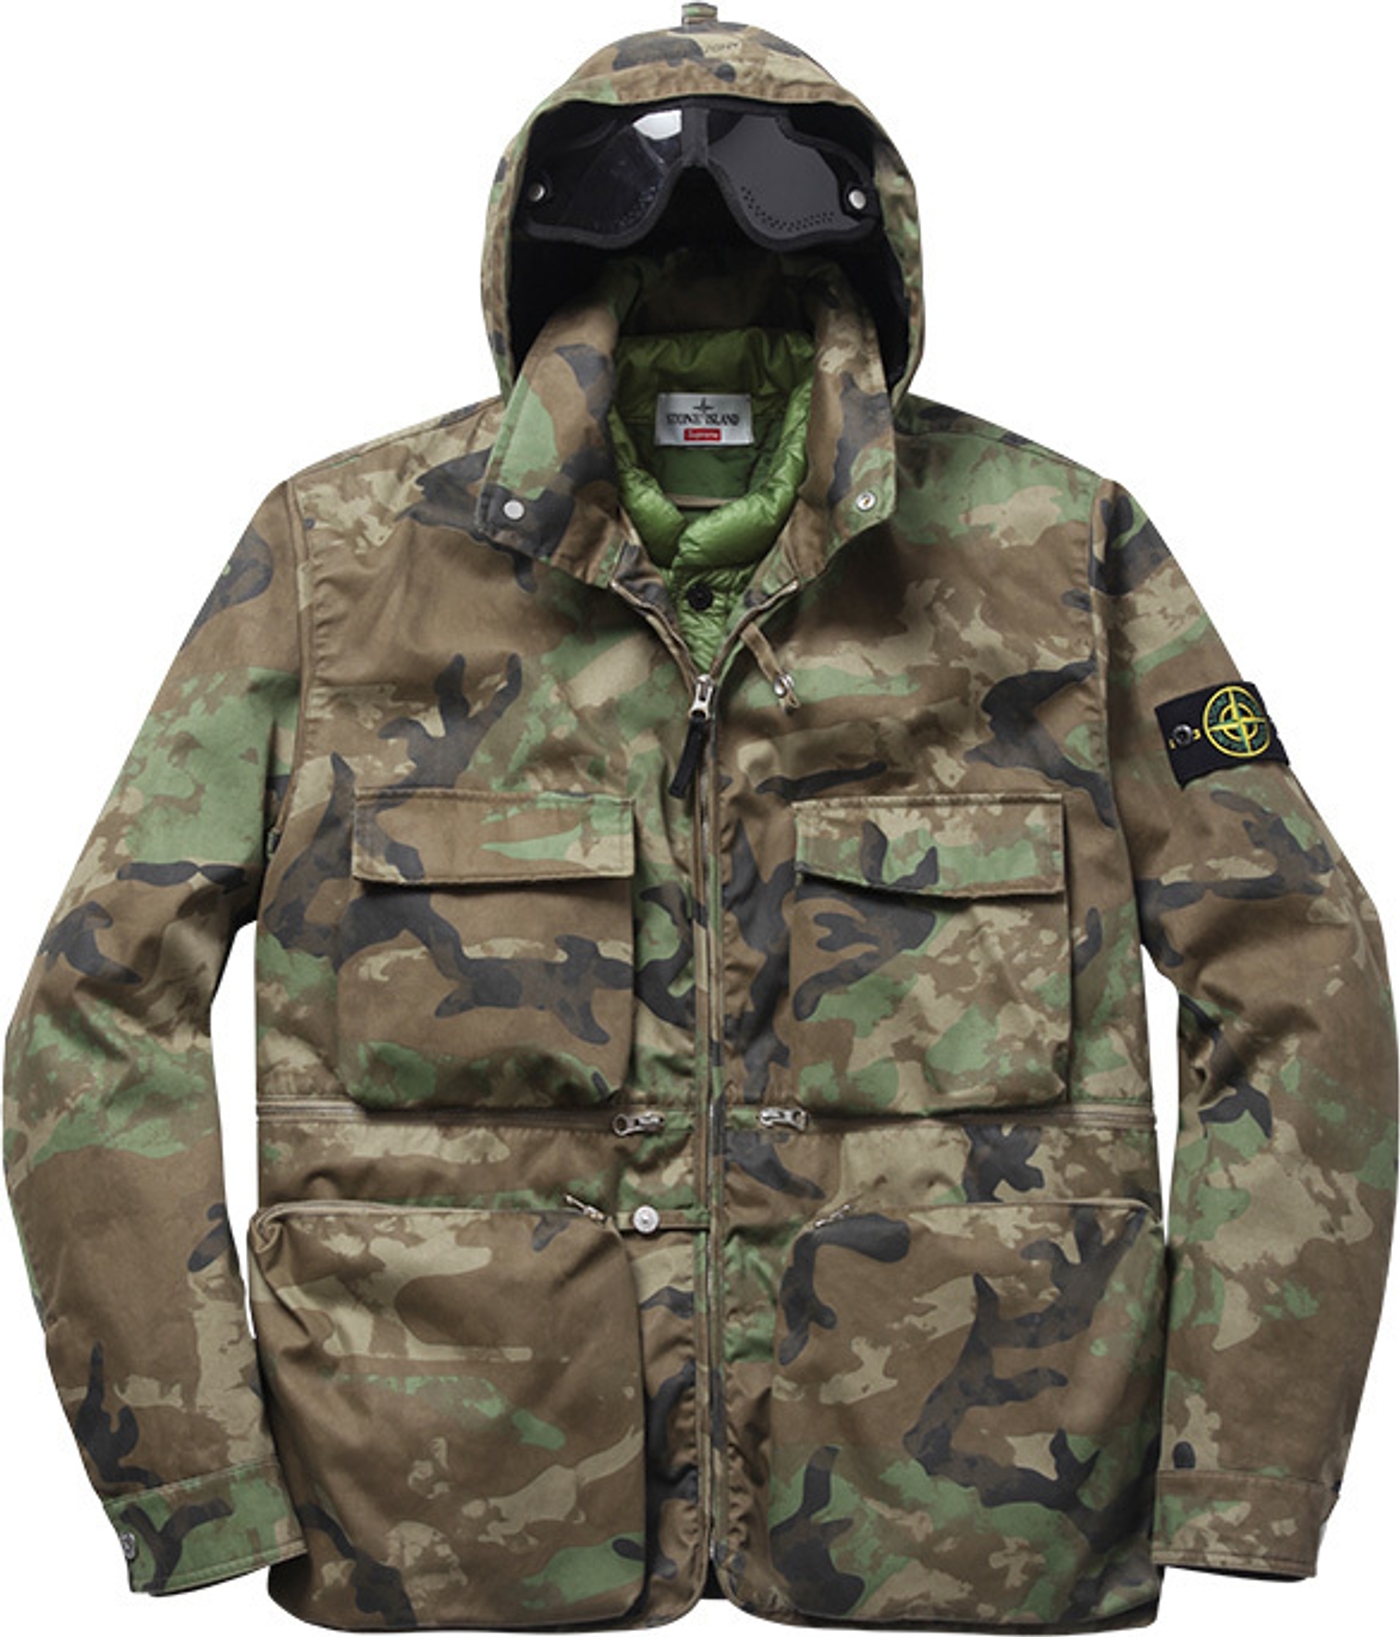 Raso Gommato Cover Nero Jacket 
Wind and water-resistant cotton with removable down liner. Removable eye mask with stow away hood.<br>
Made by Stone Island<br> (12/36)